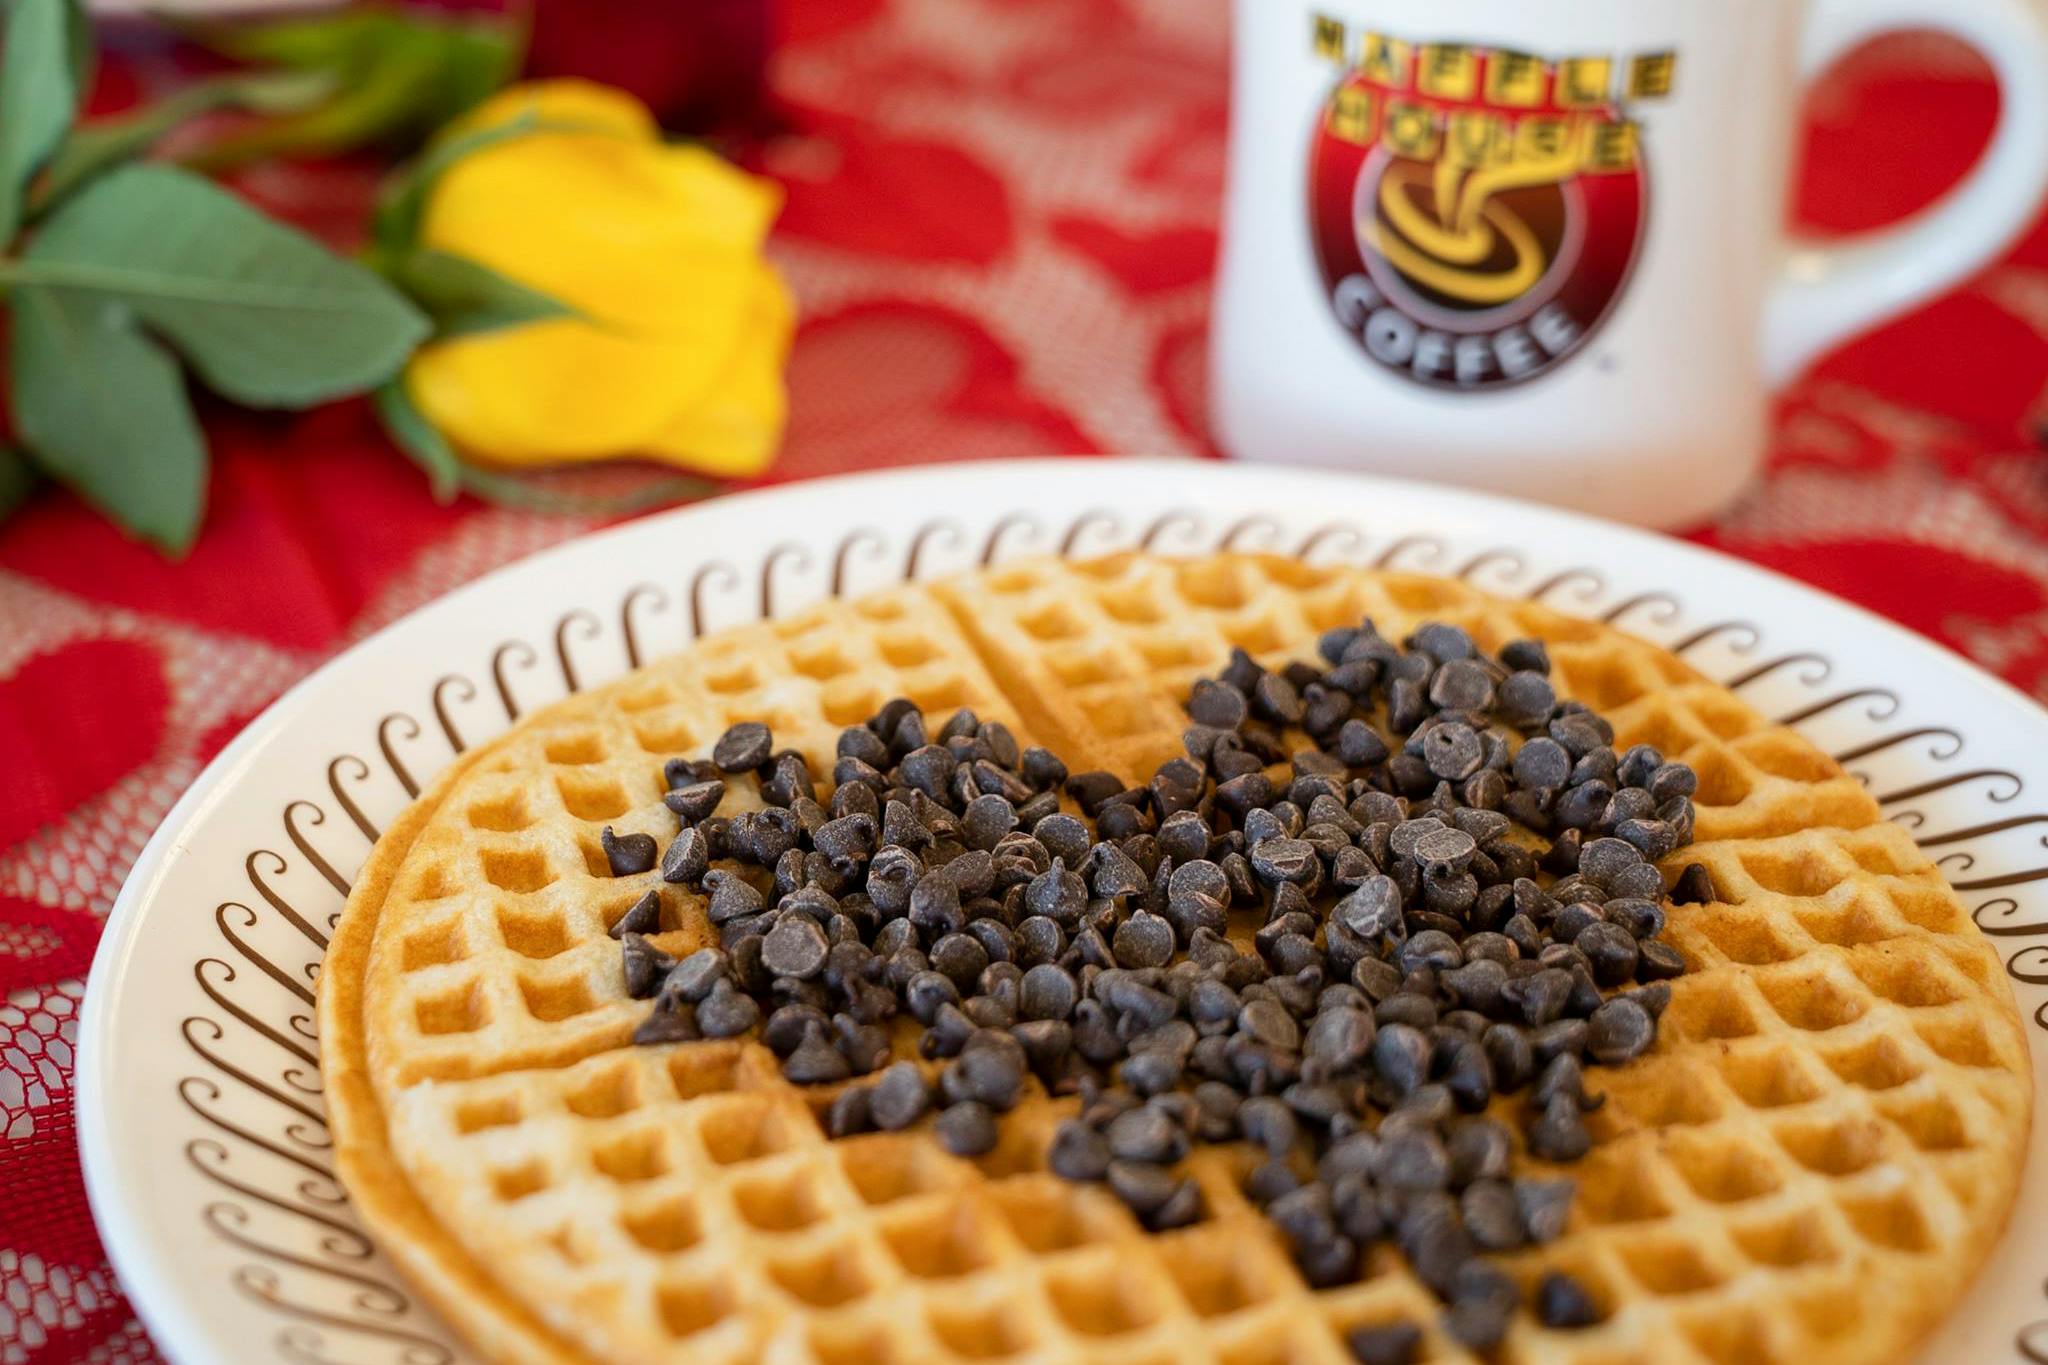 A Waffle House waffle with chocolate chips on top of it in the shape of a heart.